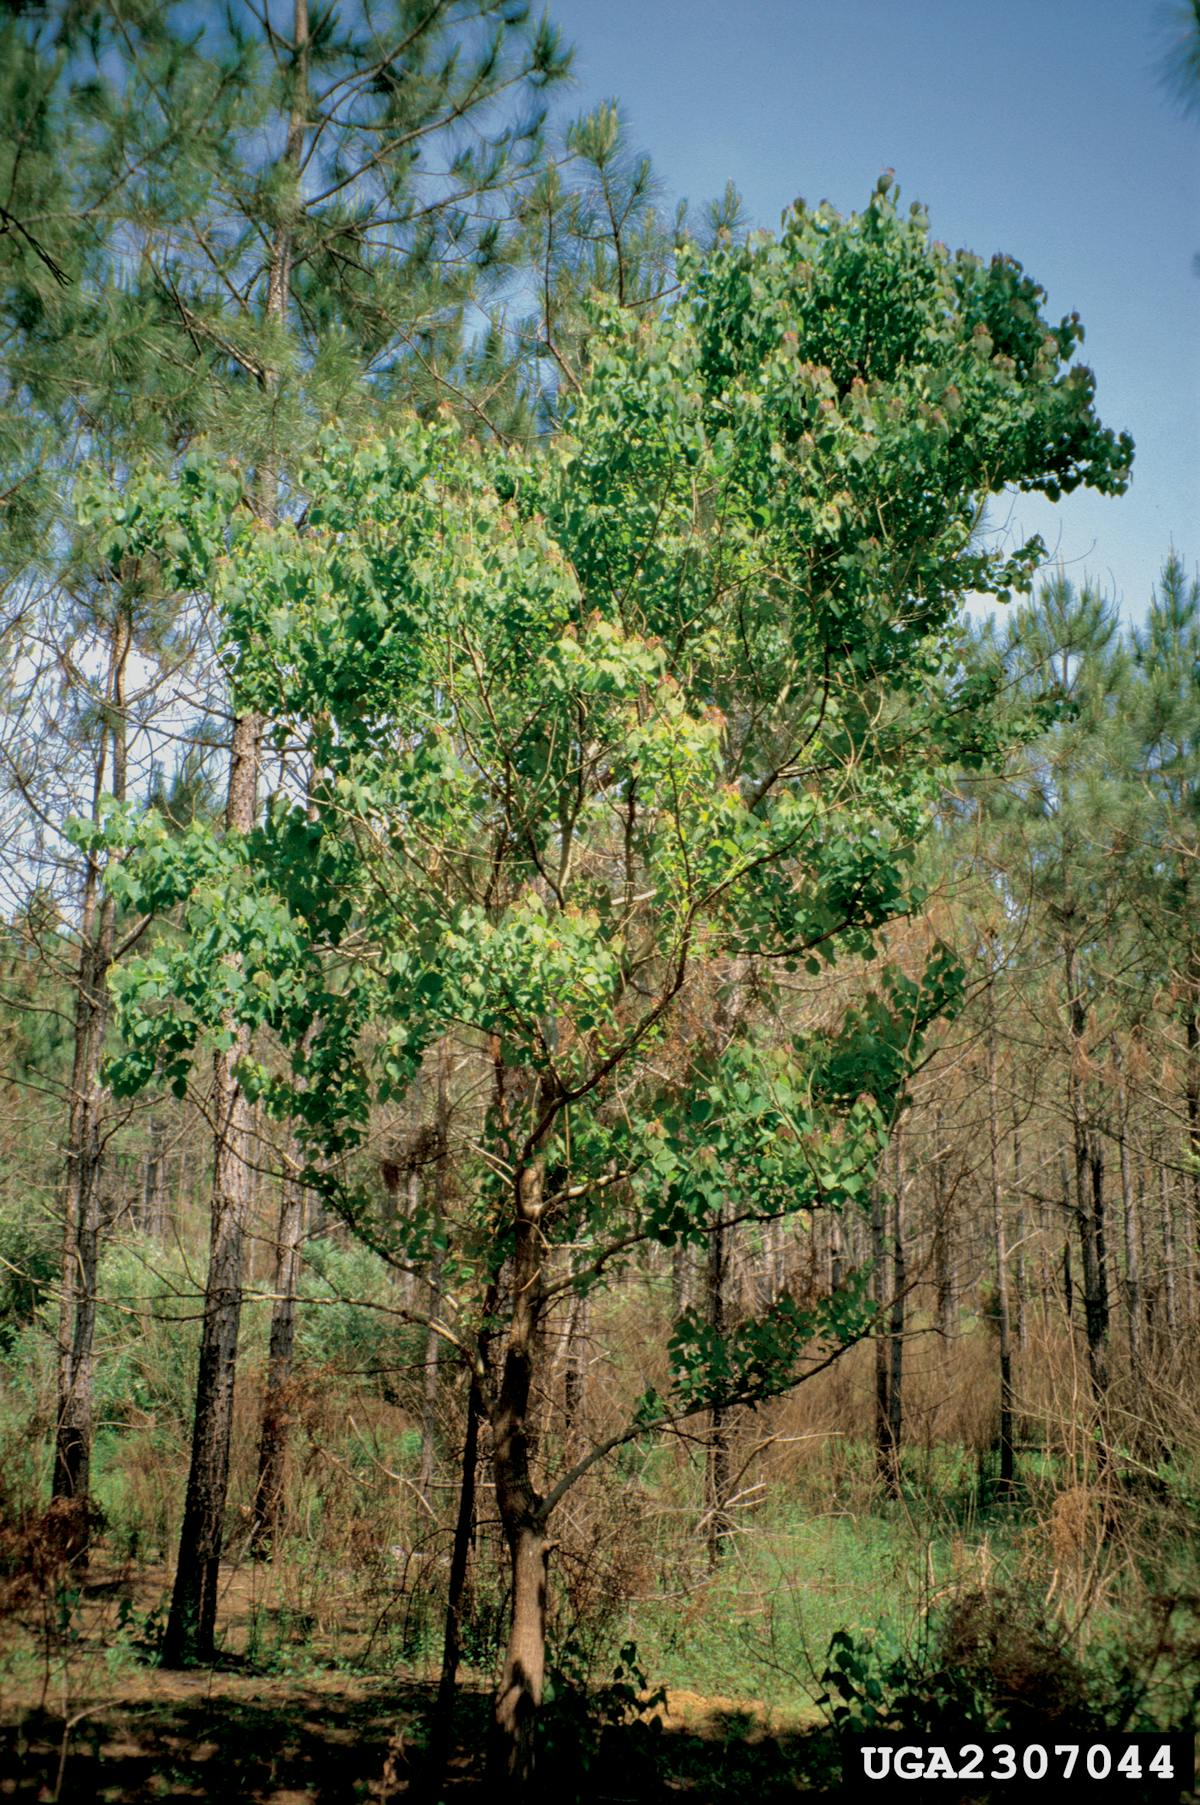 Some Chinese tallowtrees can produce up to 100,000 seeds. James H. Miller, USDA Forest Service, Bugwood.org